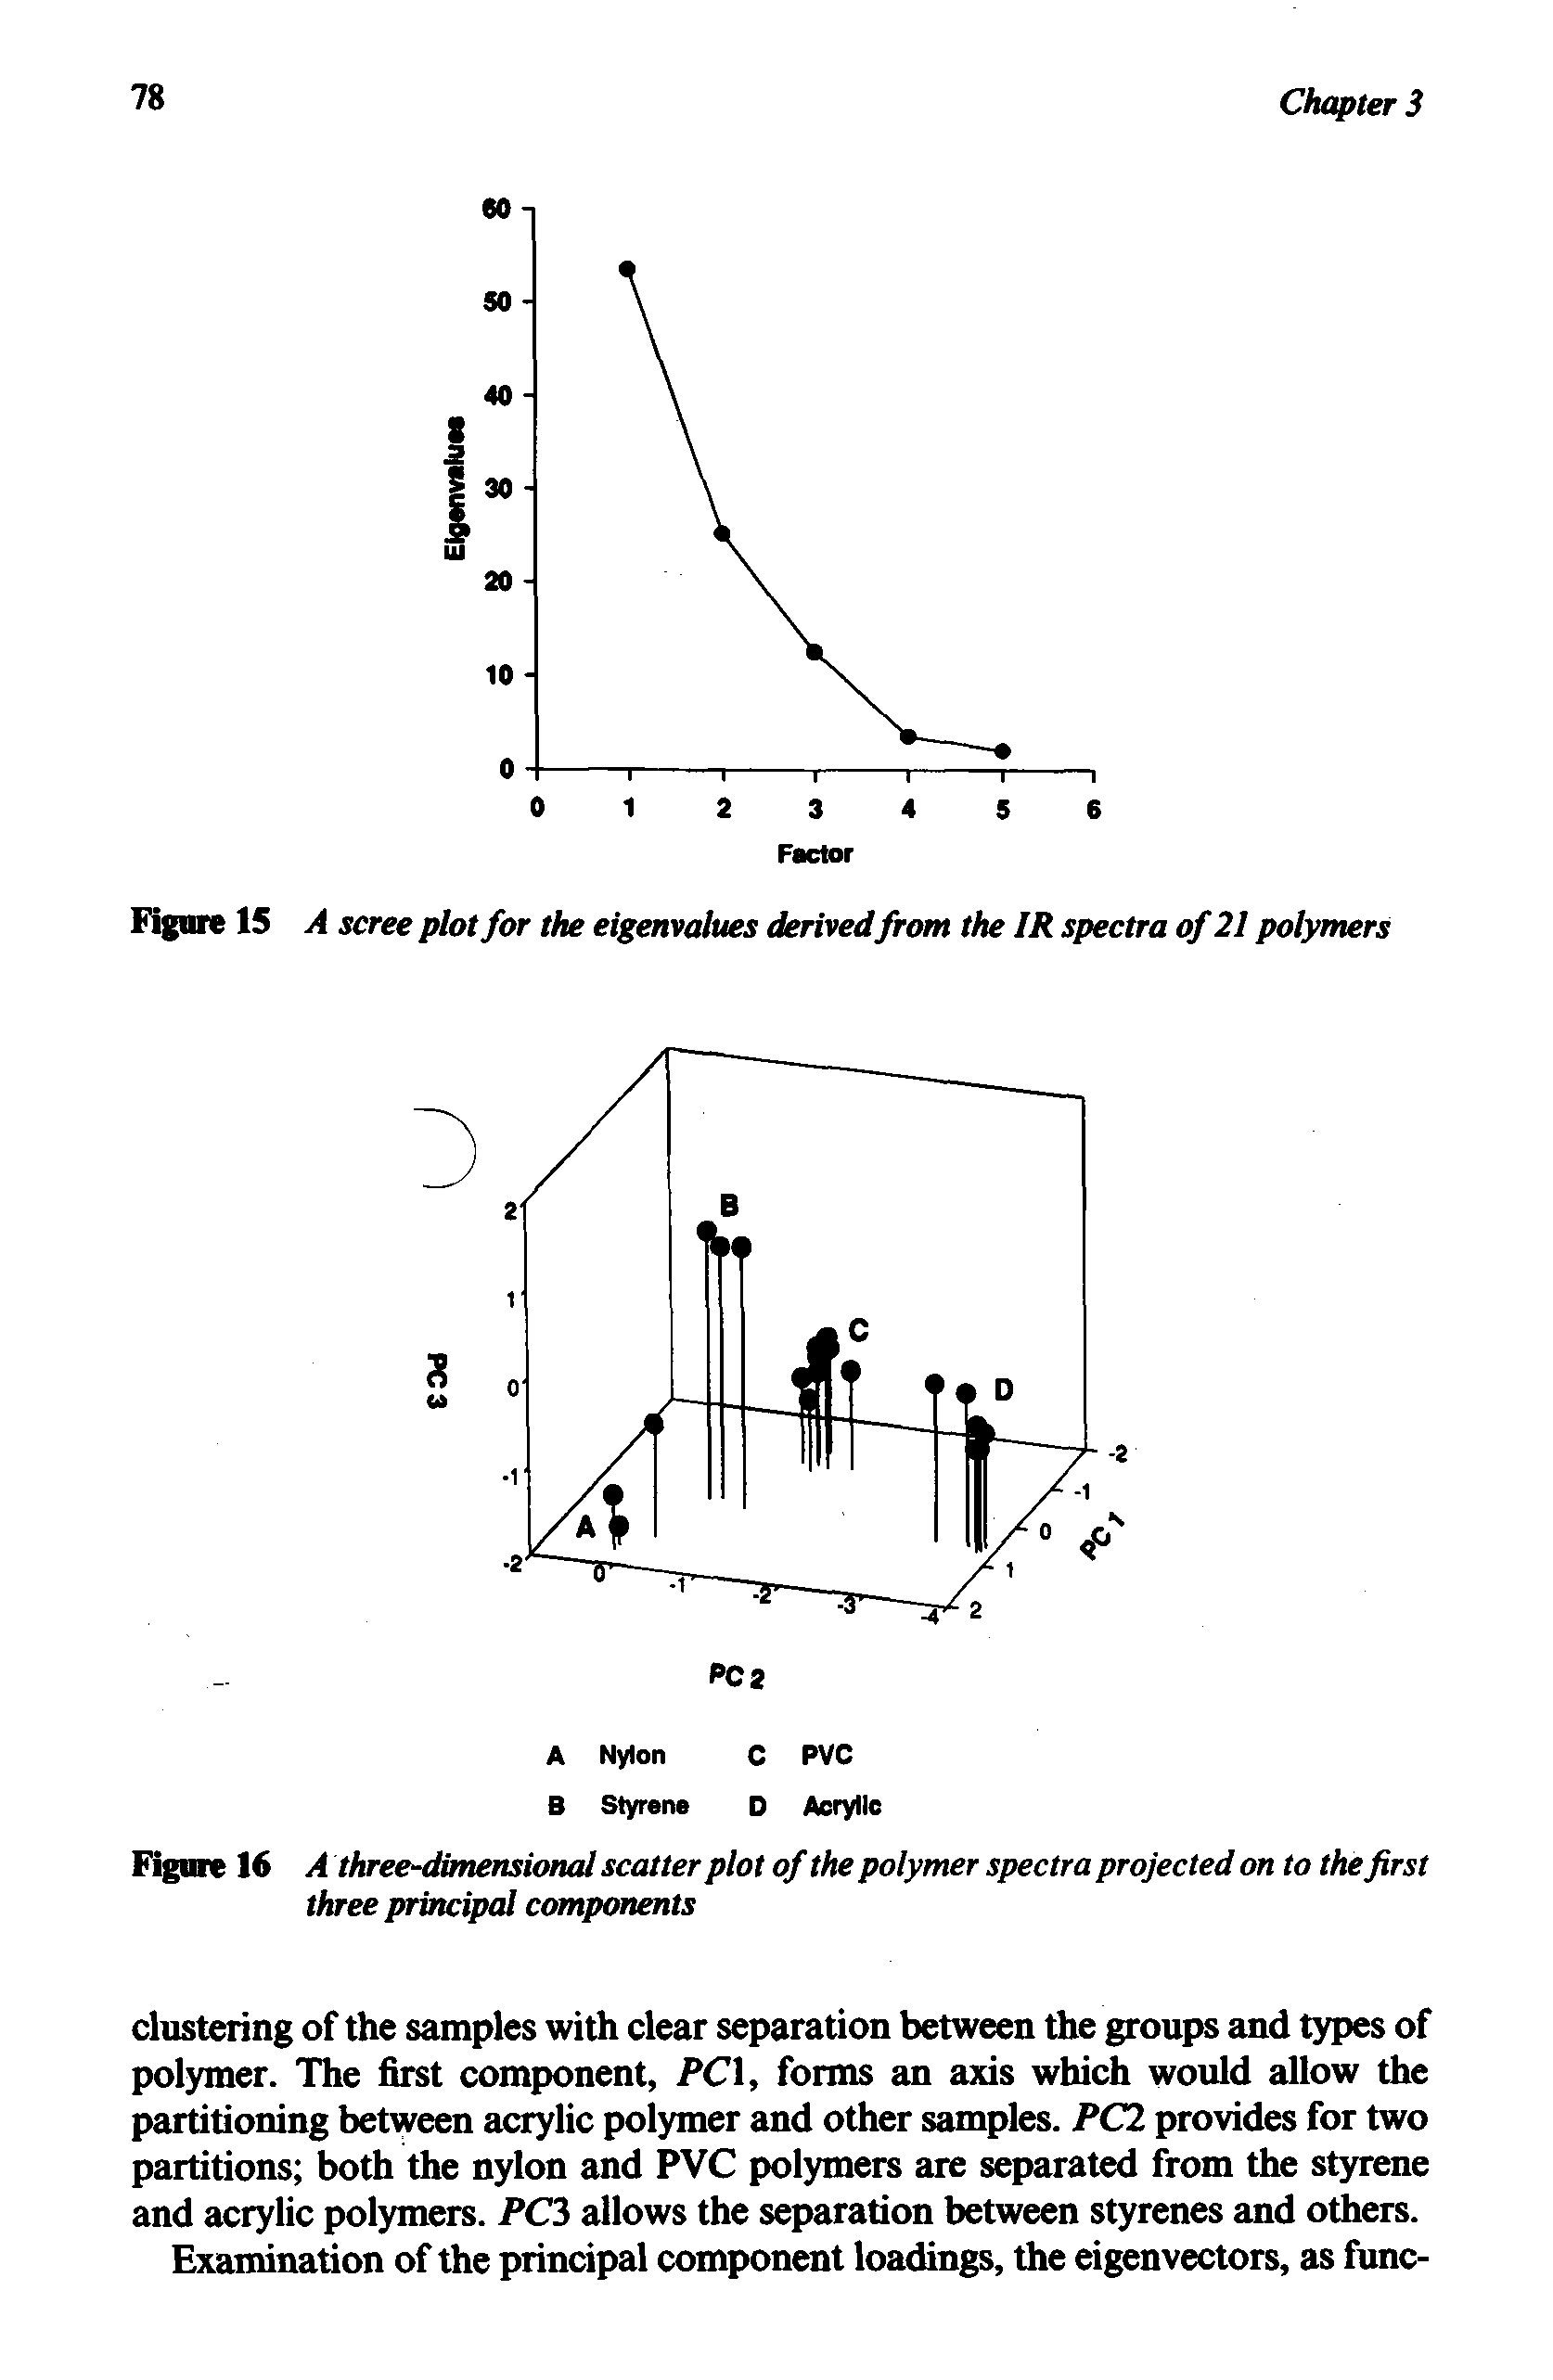 Figure 16 A three-dimensional scatter plot of the polymer spectra projected on to the first three principal components...